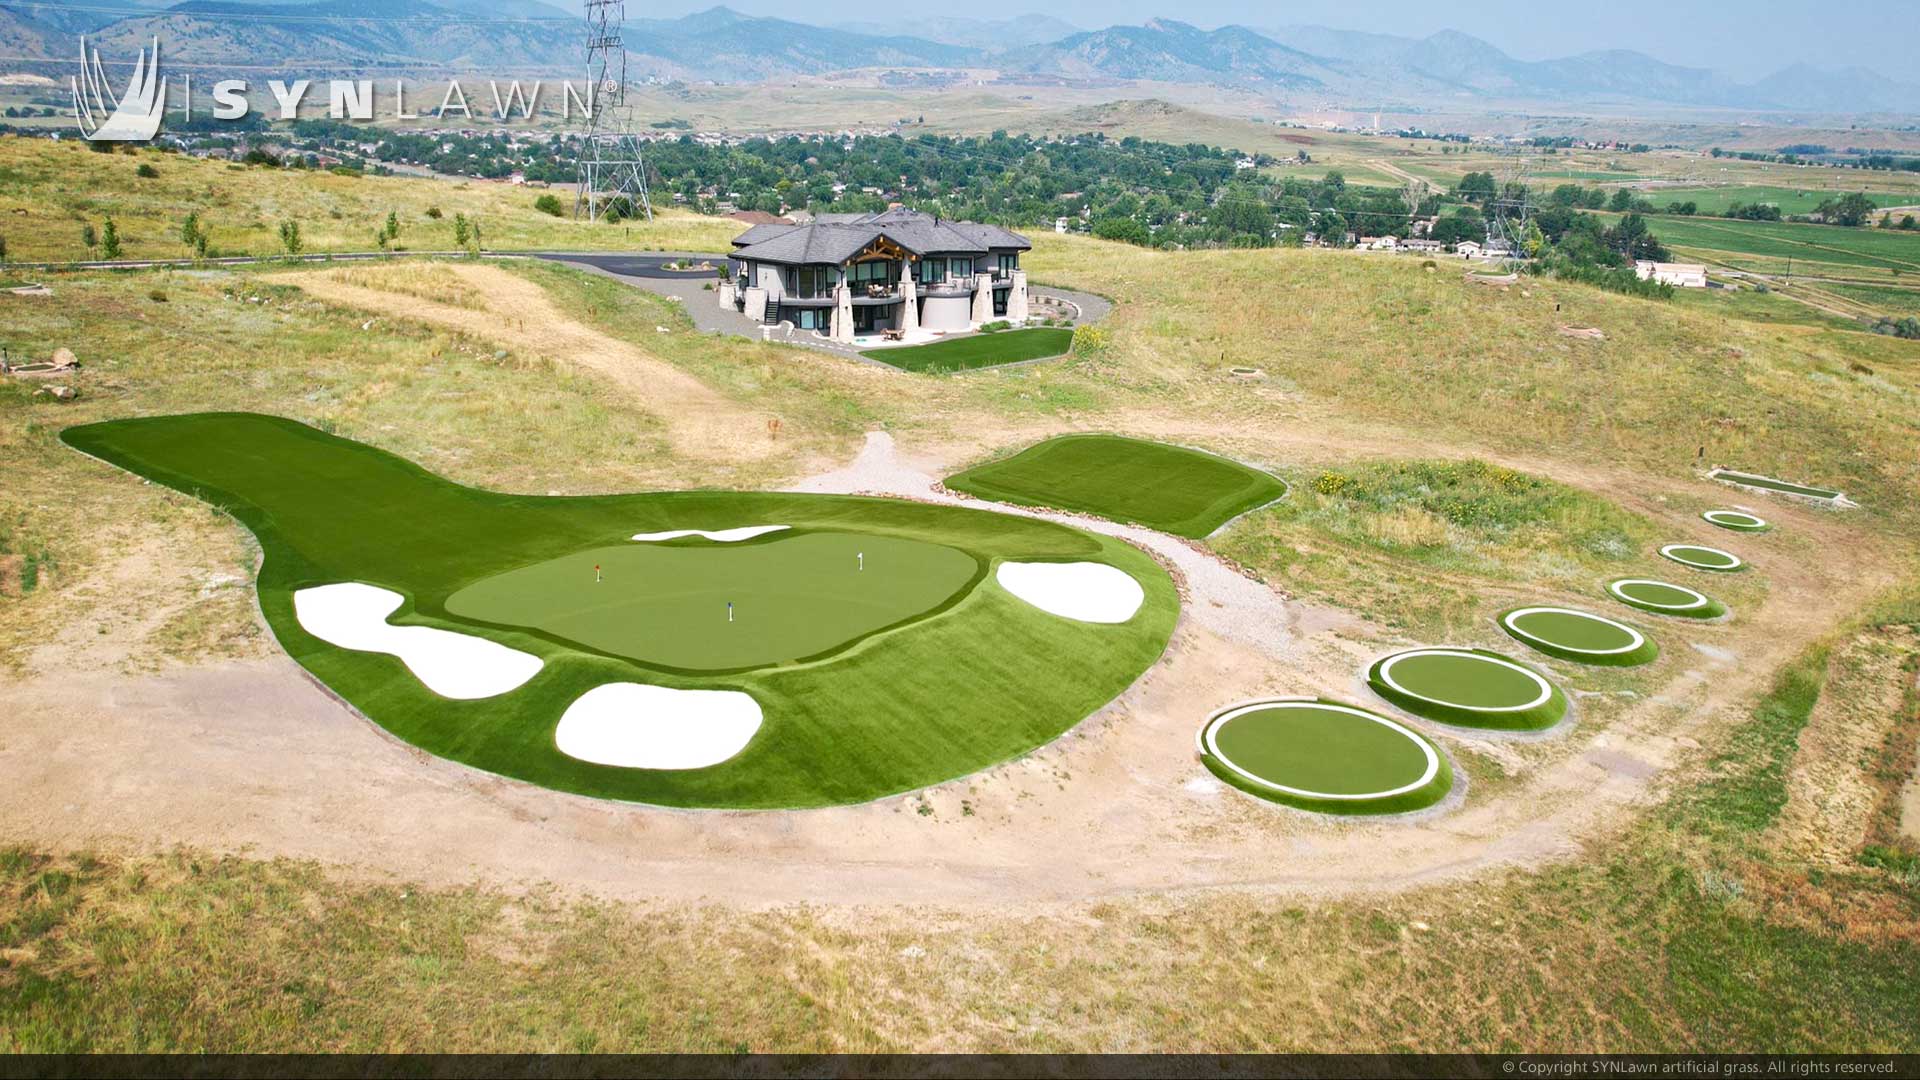 SYNLawn Golf synthetic grass at Windy Way Ranch Golden Colorado